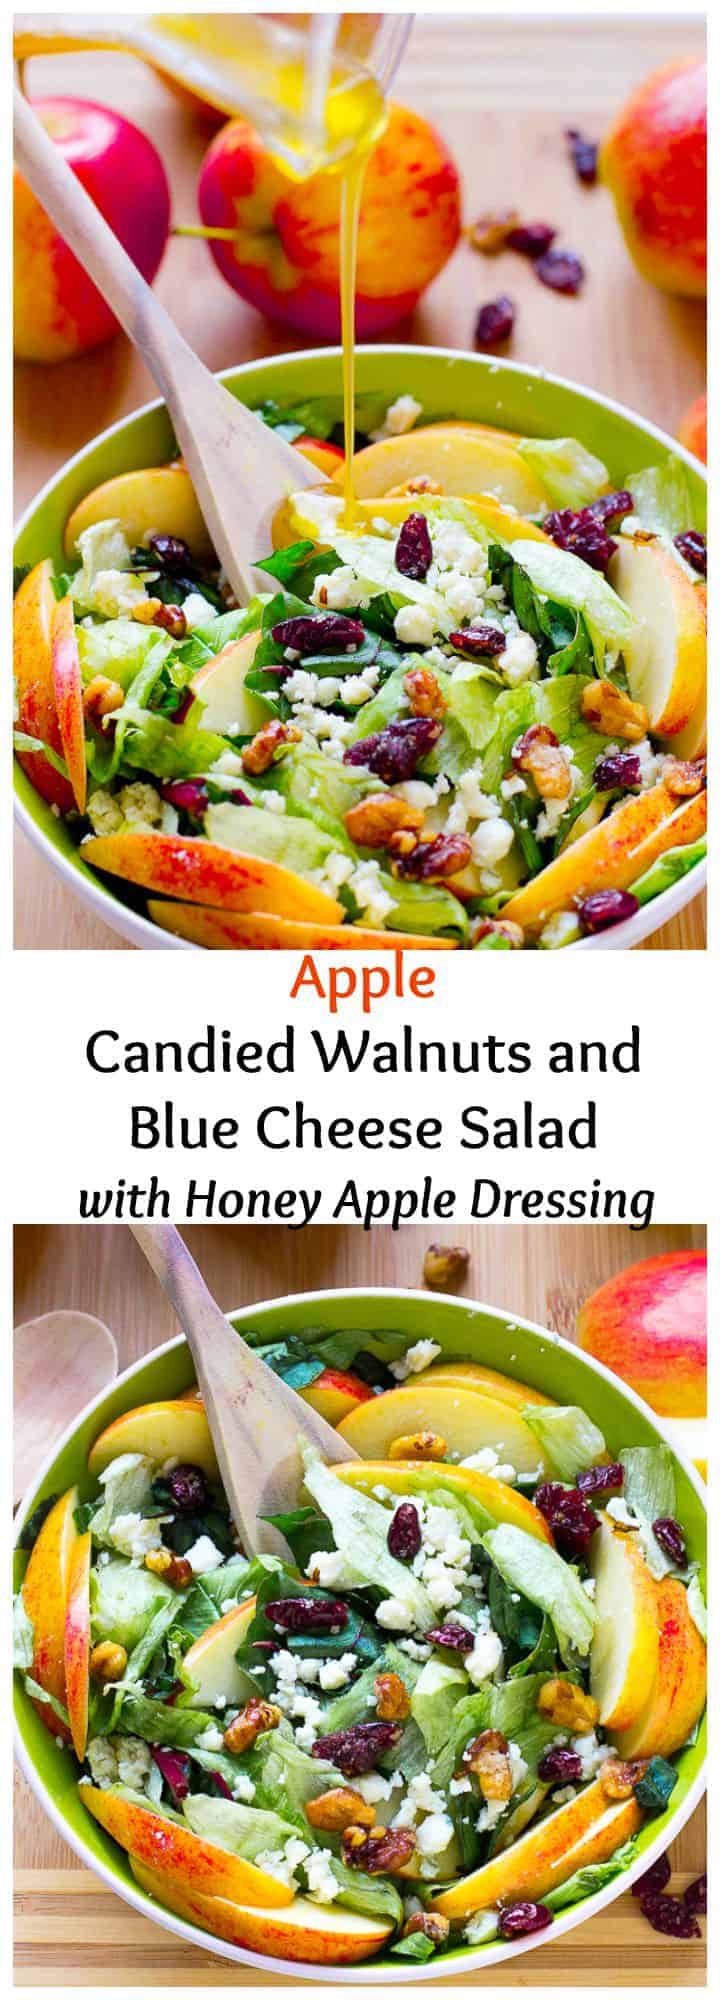 This Apple Candied Walnuts and Blue Cheese Salad with Honey Apple Dressing is filled with fall flavours, sweet and crunchy and healthy!